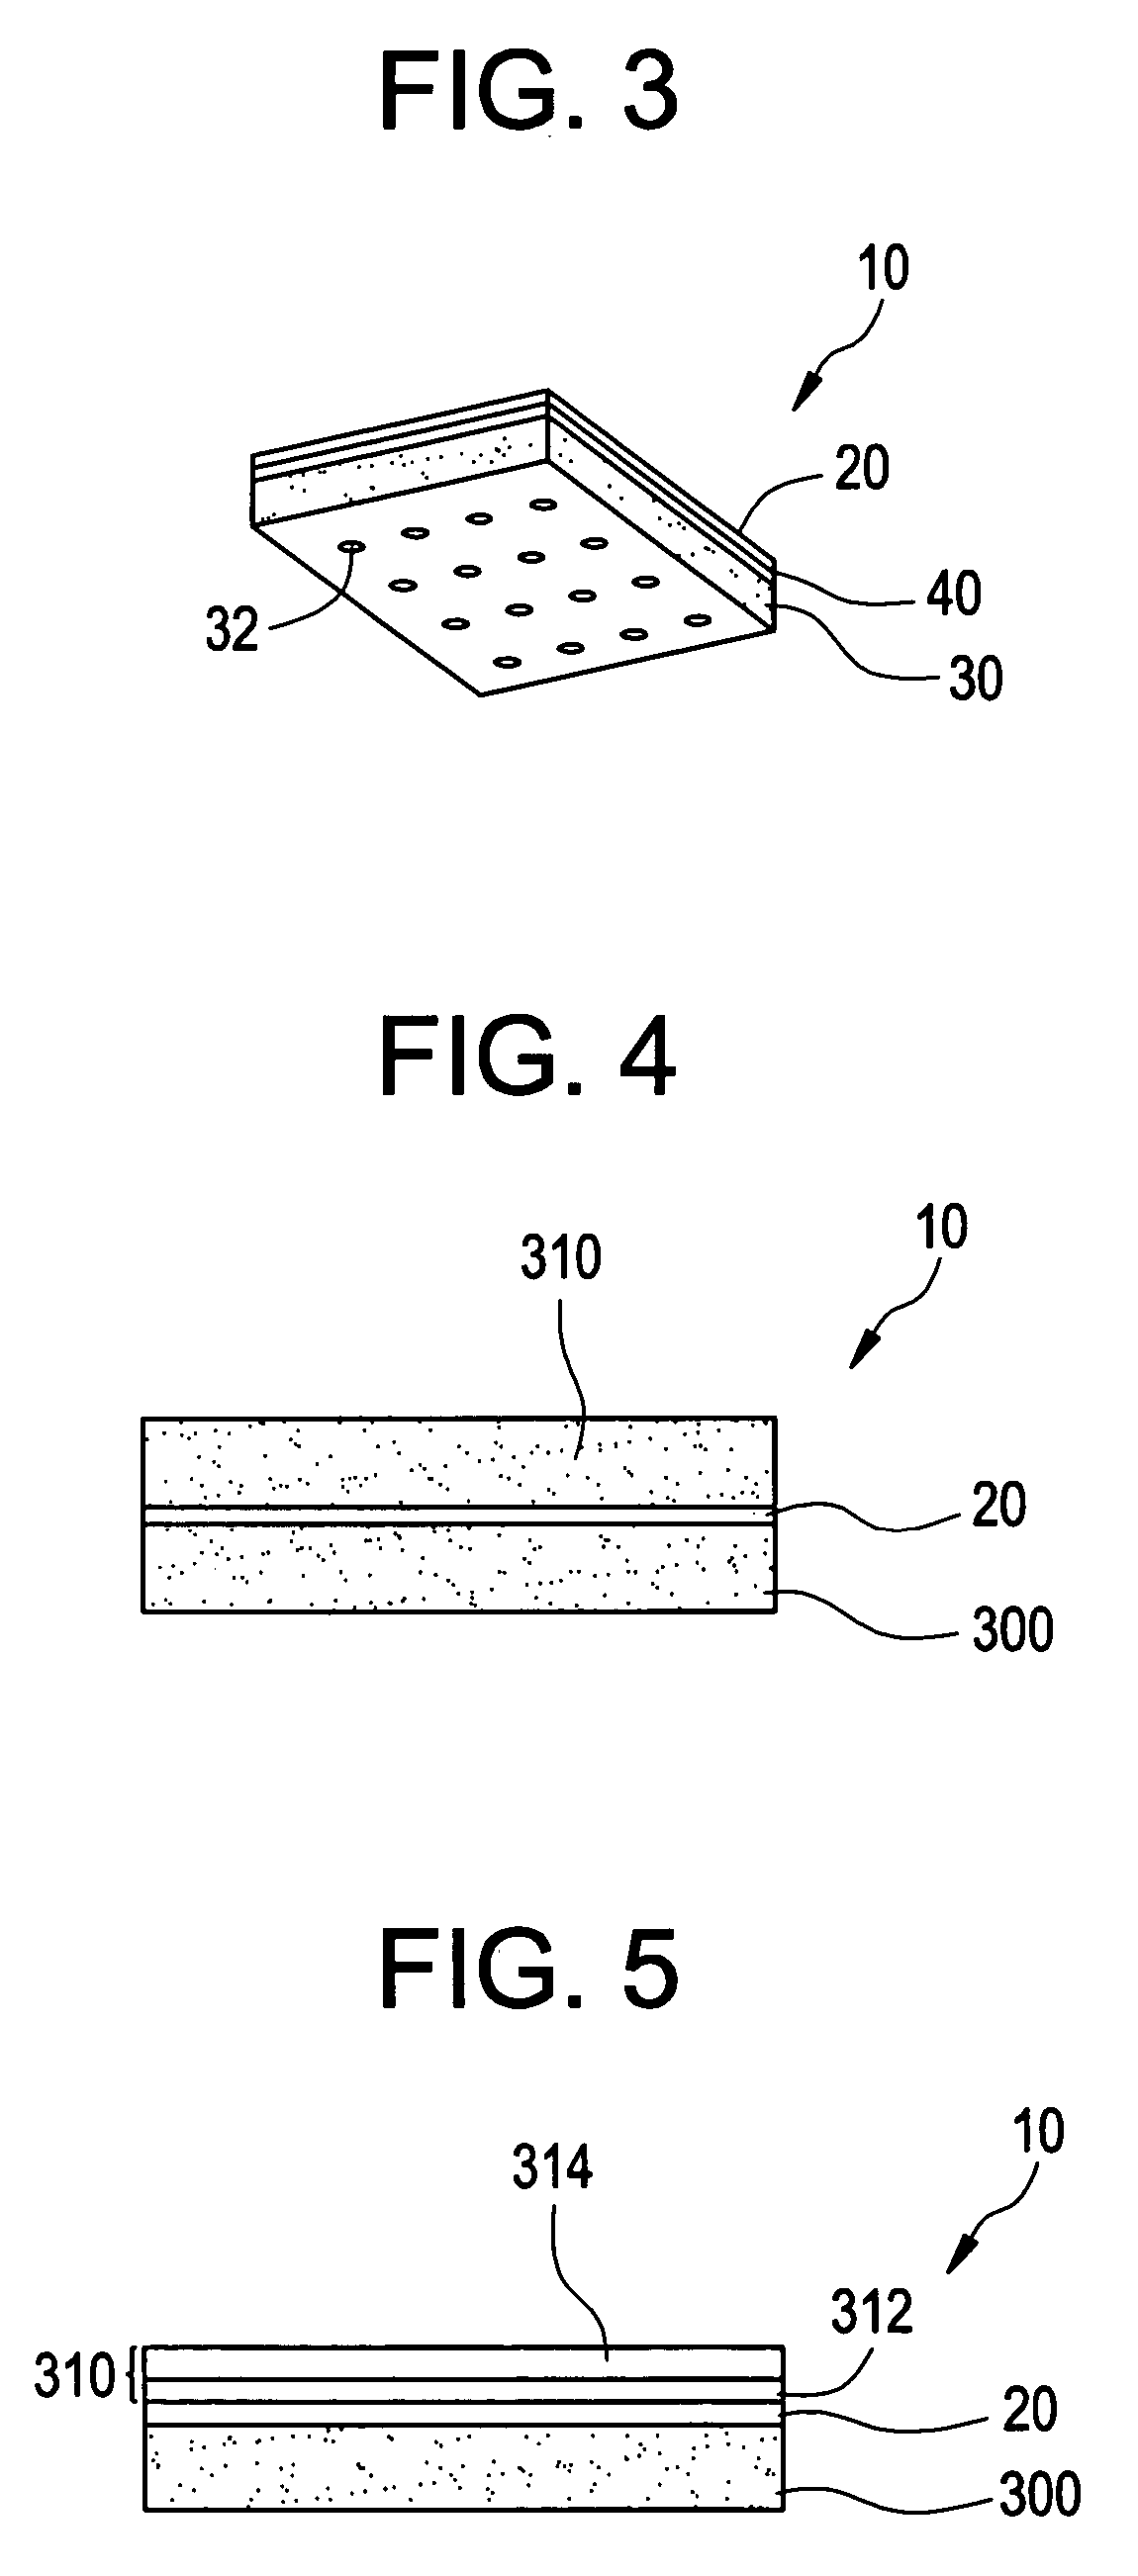 Glass product for use in ultra-thin glass display applications